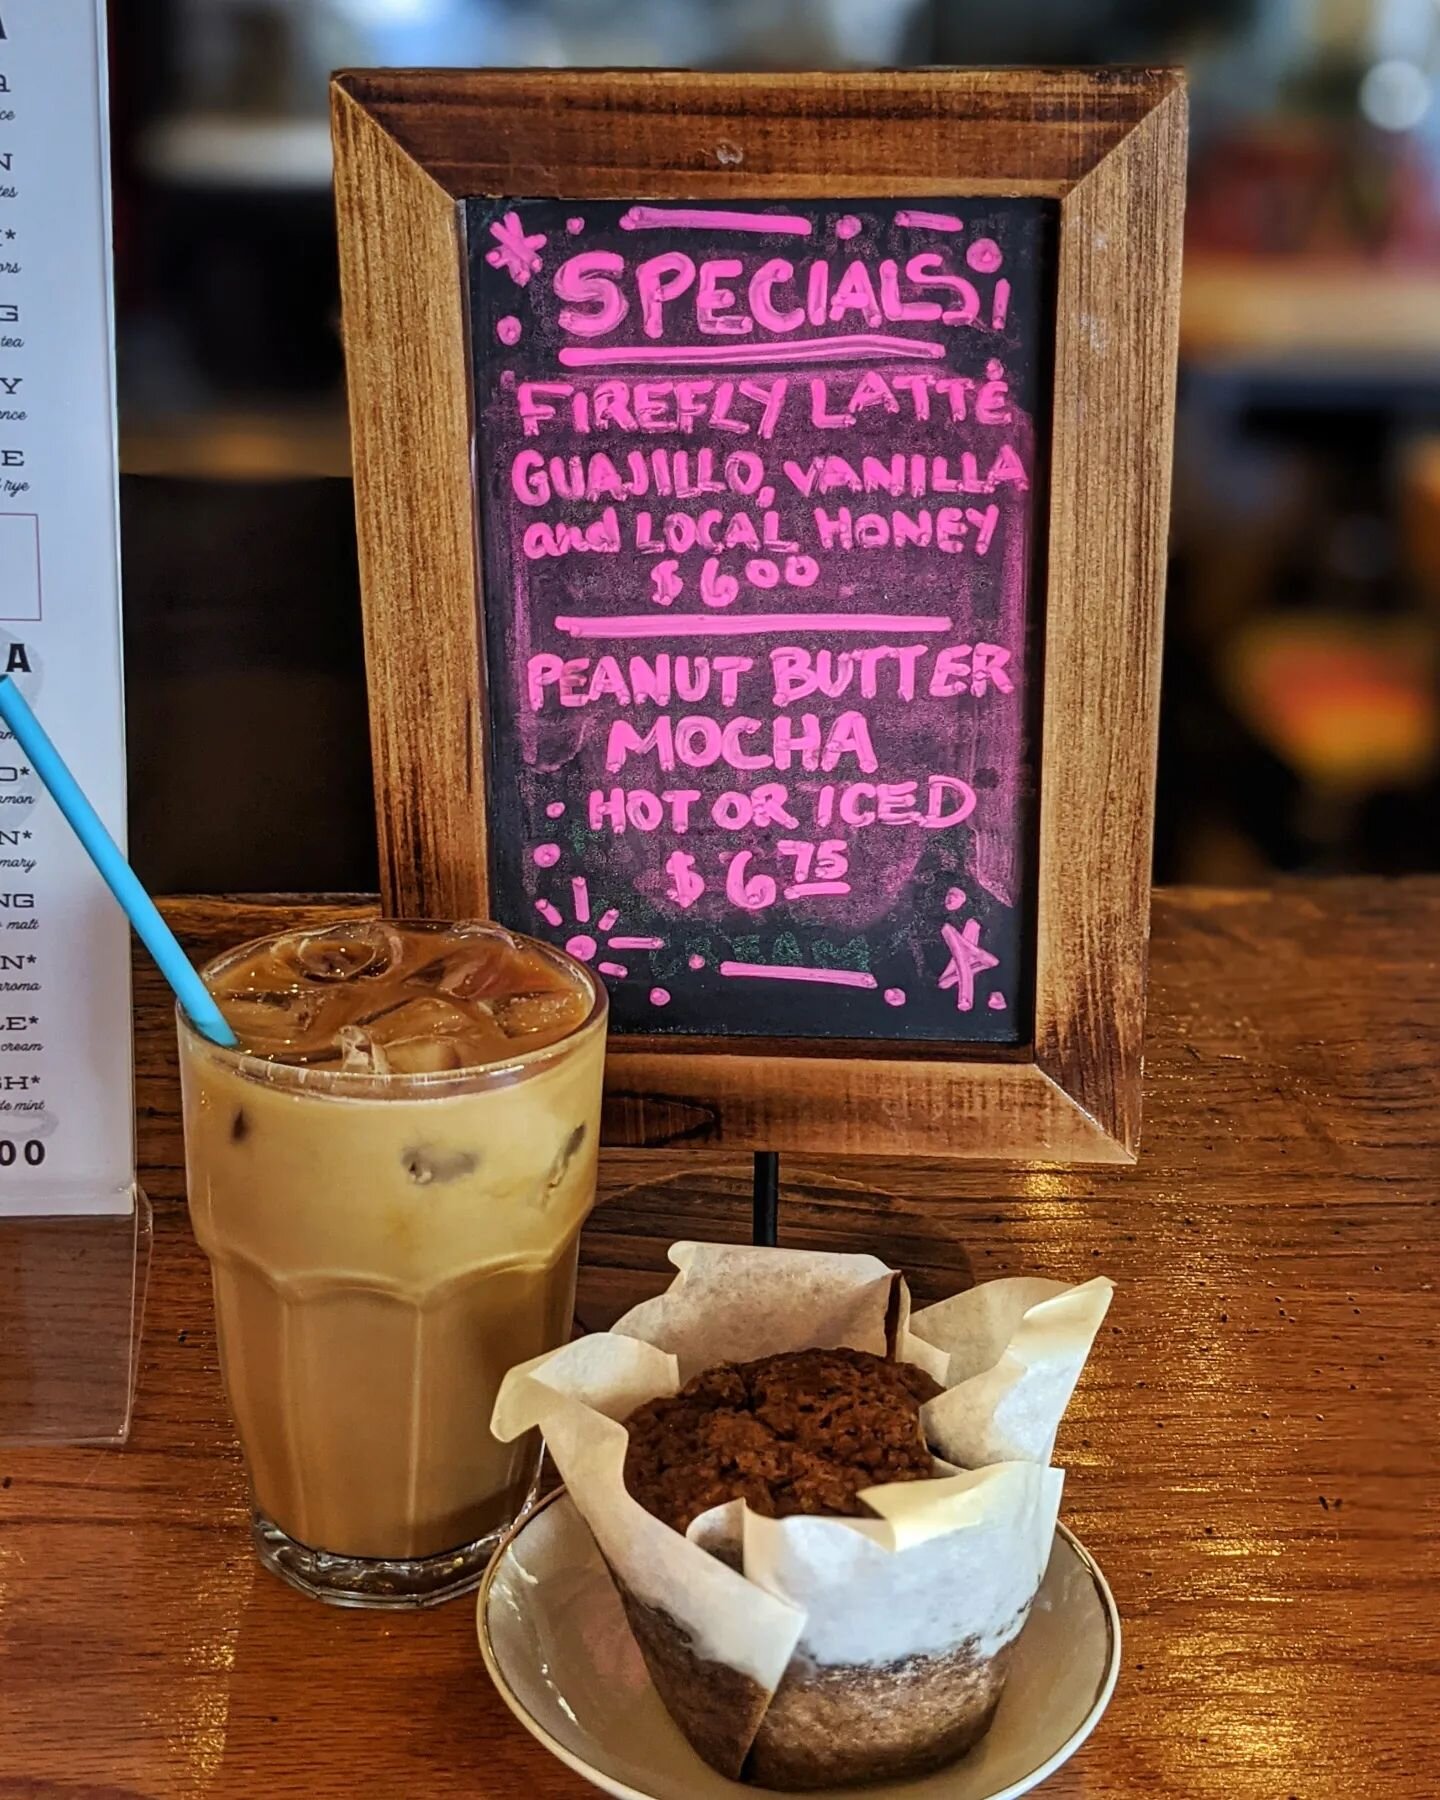 💡FIREFLY LATTE 💡
Itching for fall and sad that you can't just force a heat wave into hibernation? This one is for you. Deep smoky guajillo chili, local honey and a touch of vanilla. We think this is the perfect late summer, wish it was fall gateway